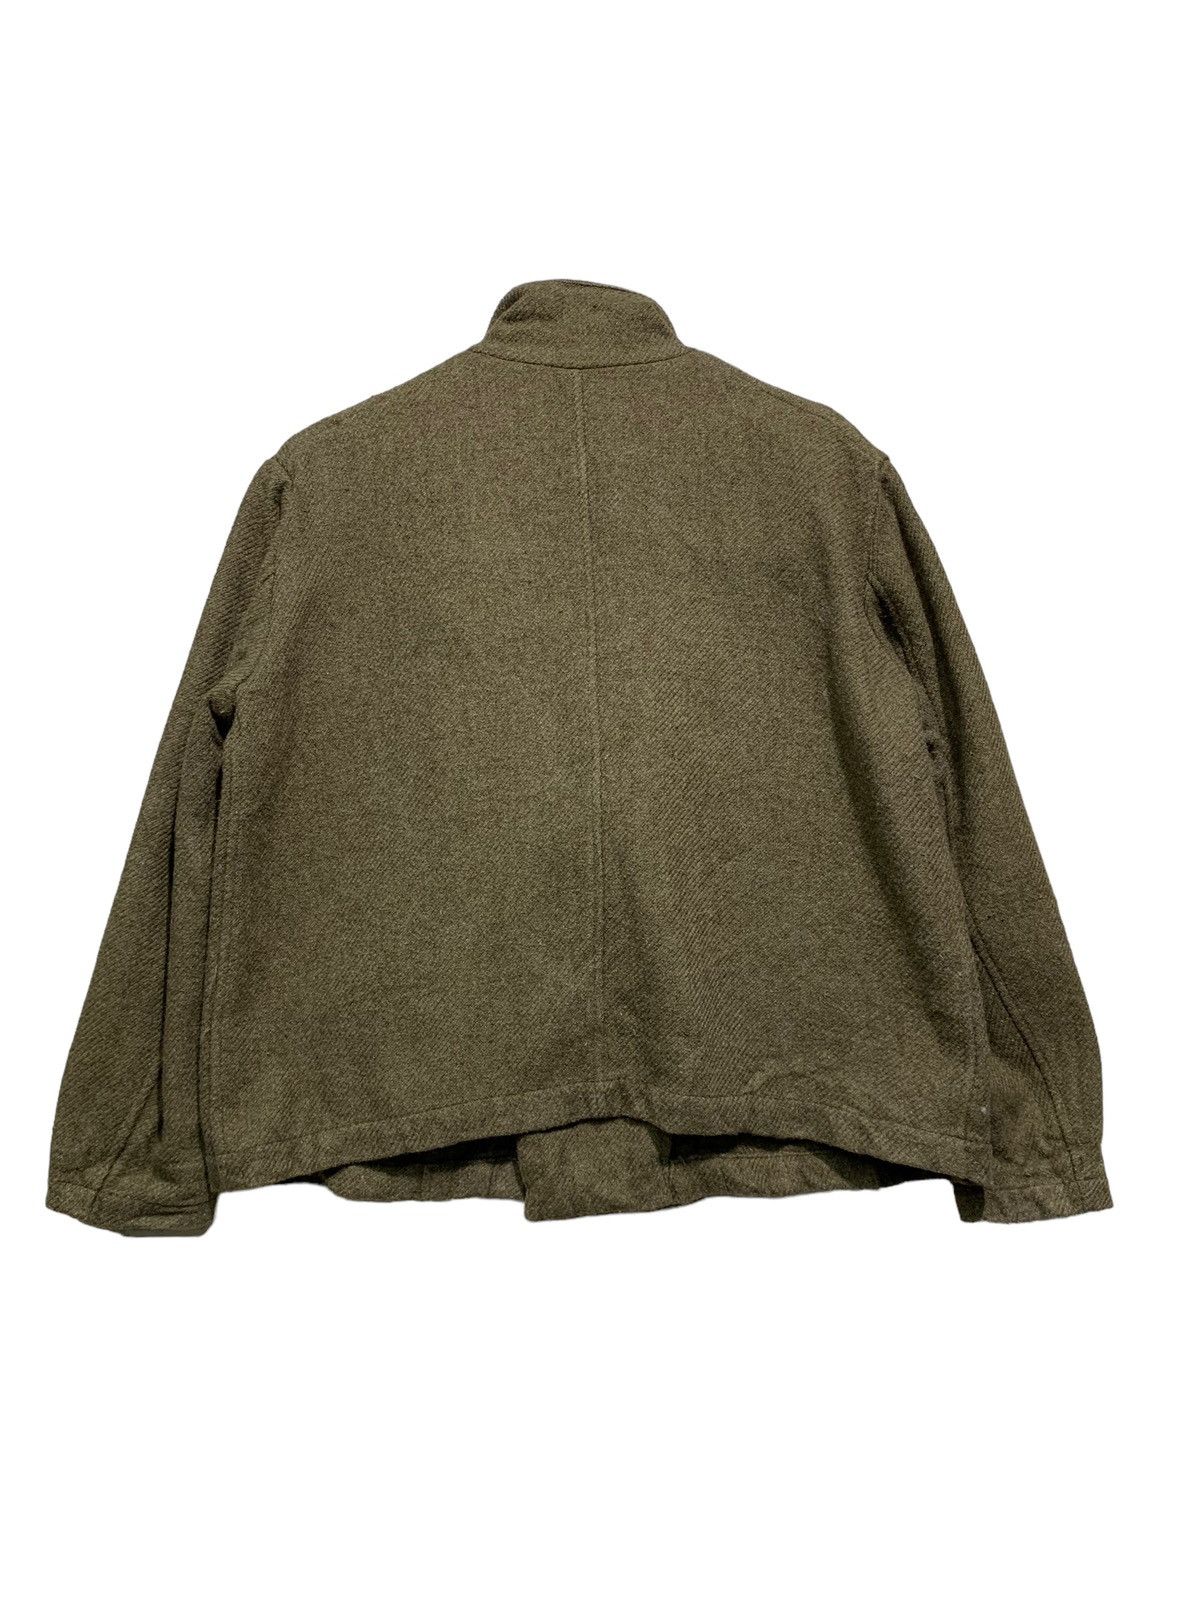 🔥Y’s WOOL DOUBLE BREAT JACKETS OLIVE GREEN - 6